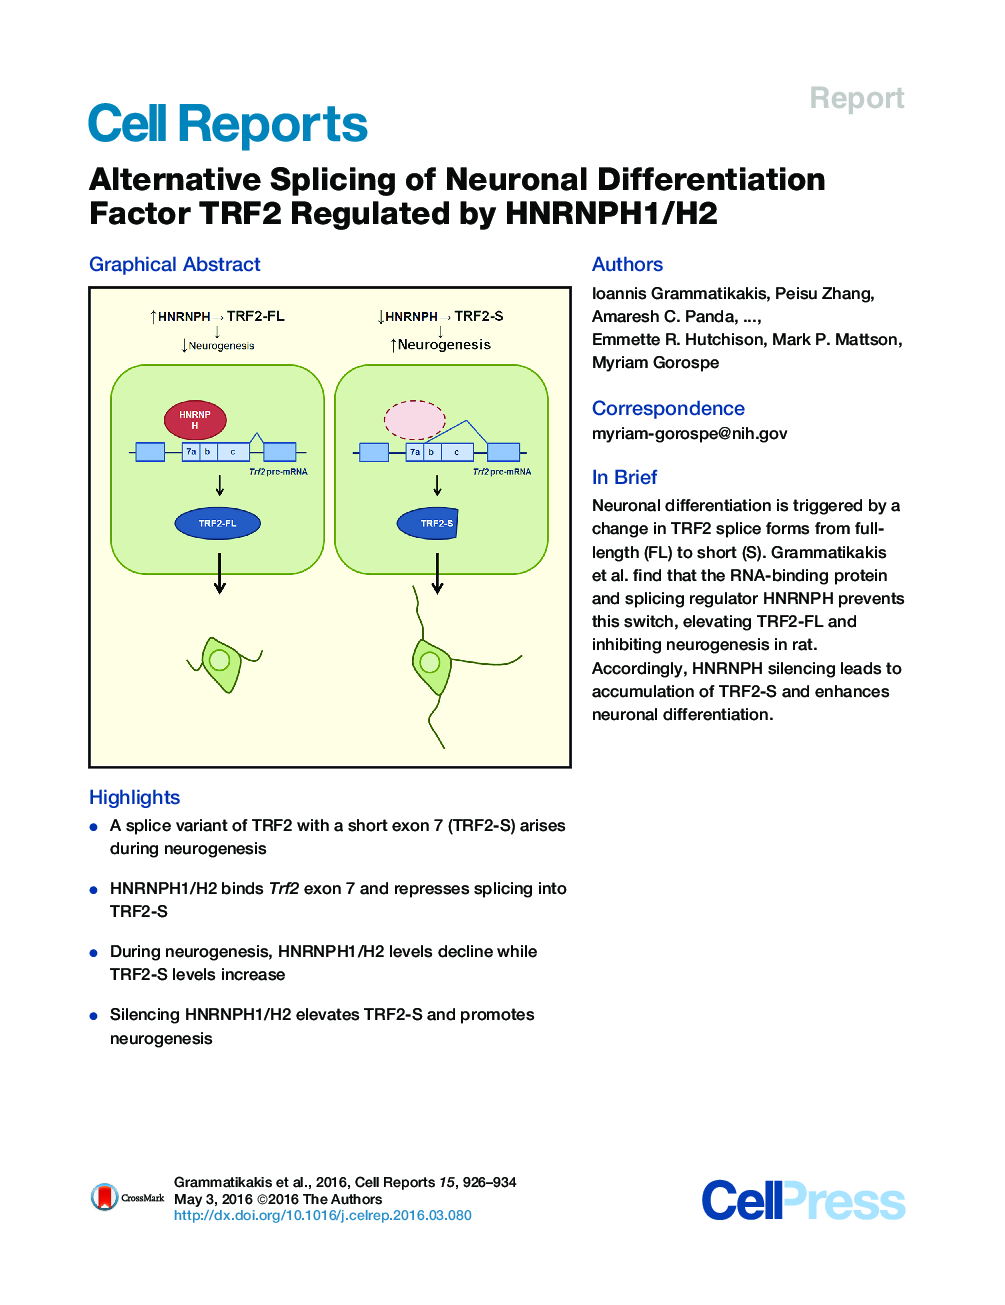 Alternative Splicing of Neuronal Differentiation Factor TRF2 Regulated by HNRNPH1/H2